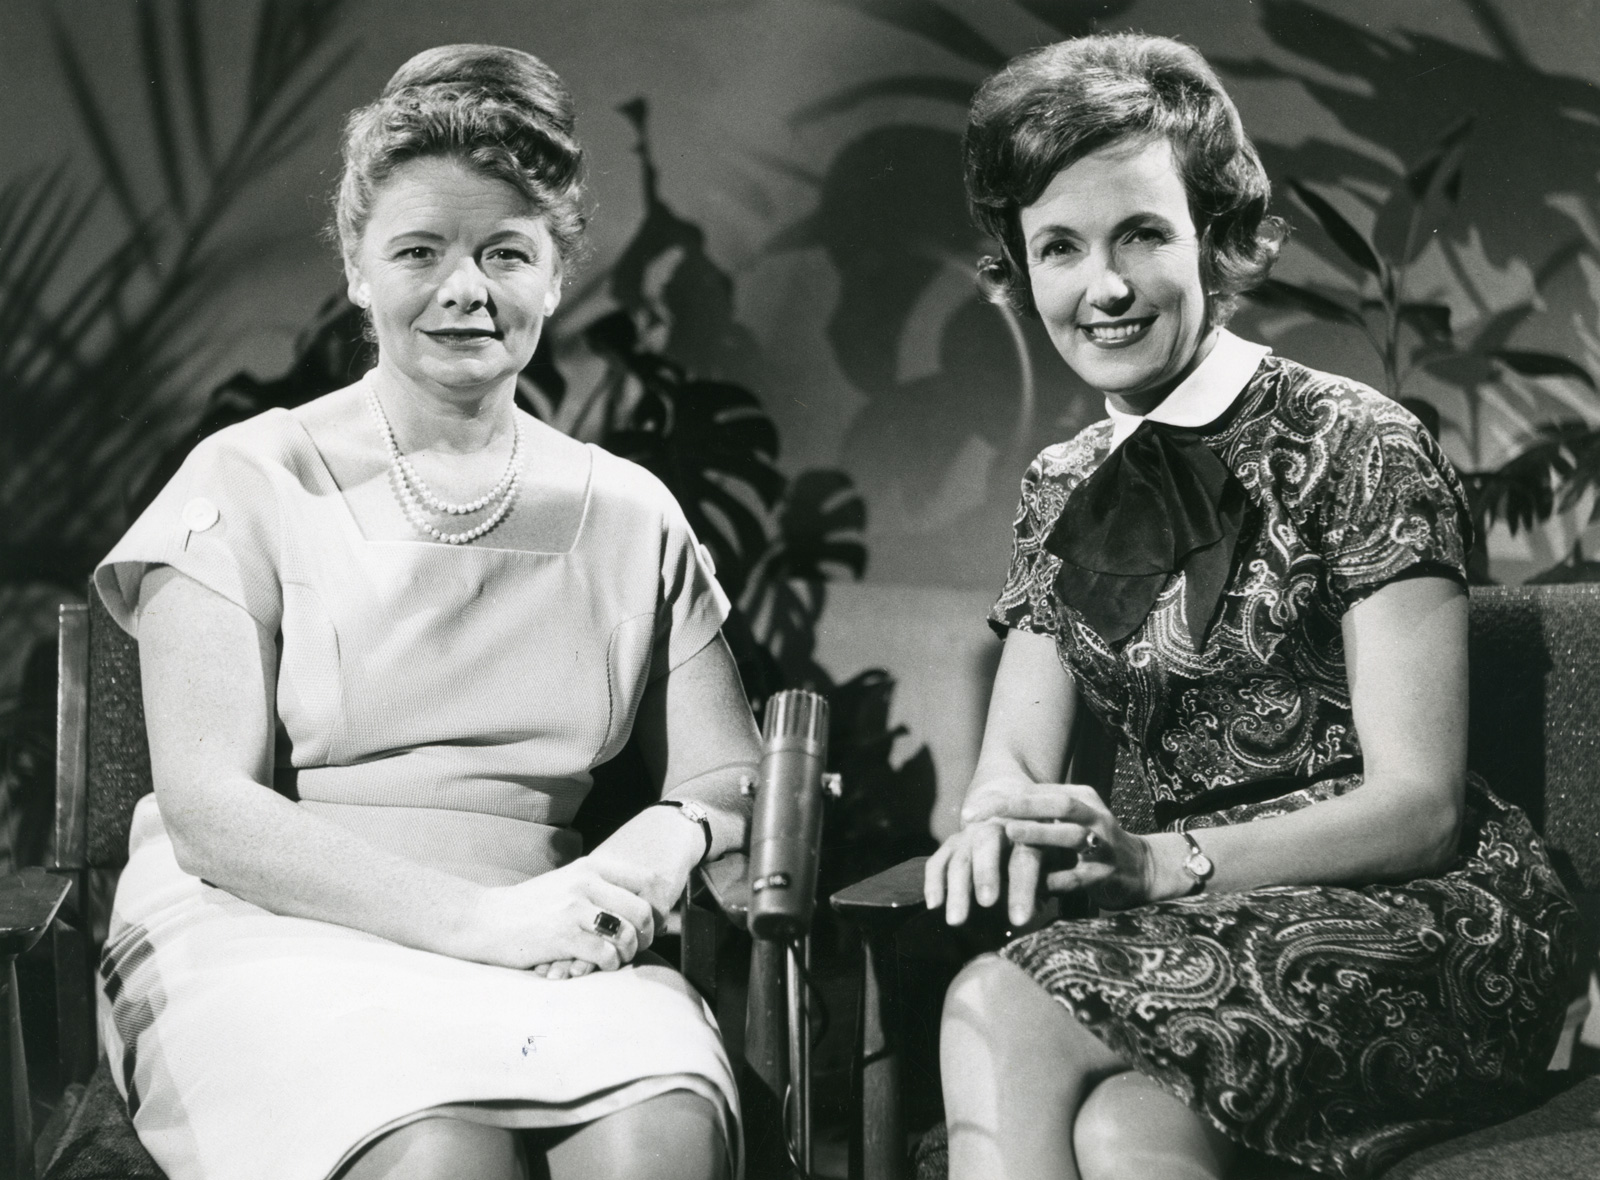 Two women seated and smiling directly at camera, c1956